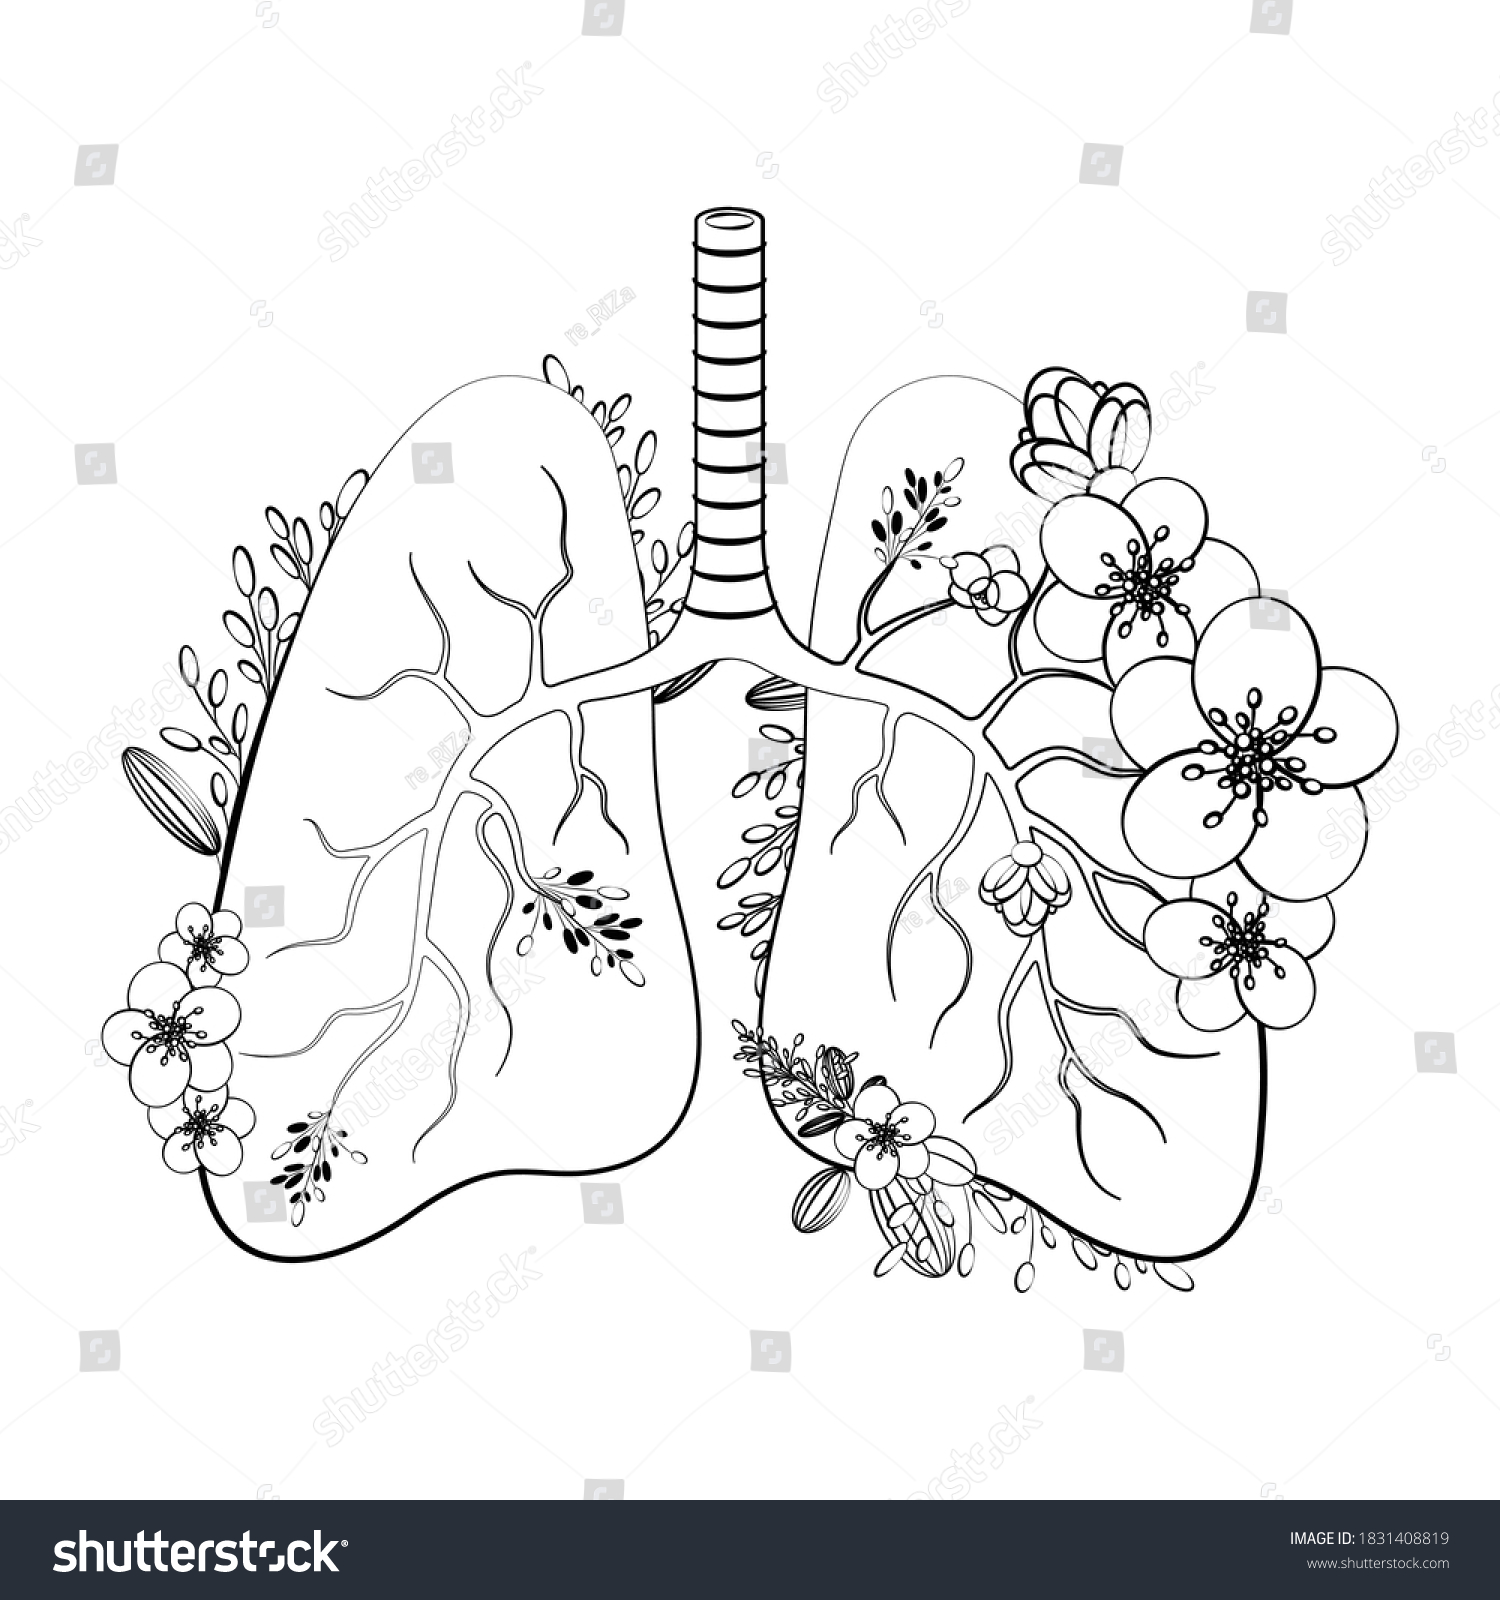 Coloring Lungs Organ People Meditative Drawing Stock Vector Royalty Free 1831408819 Shutterstock 